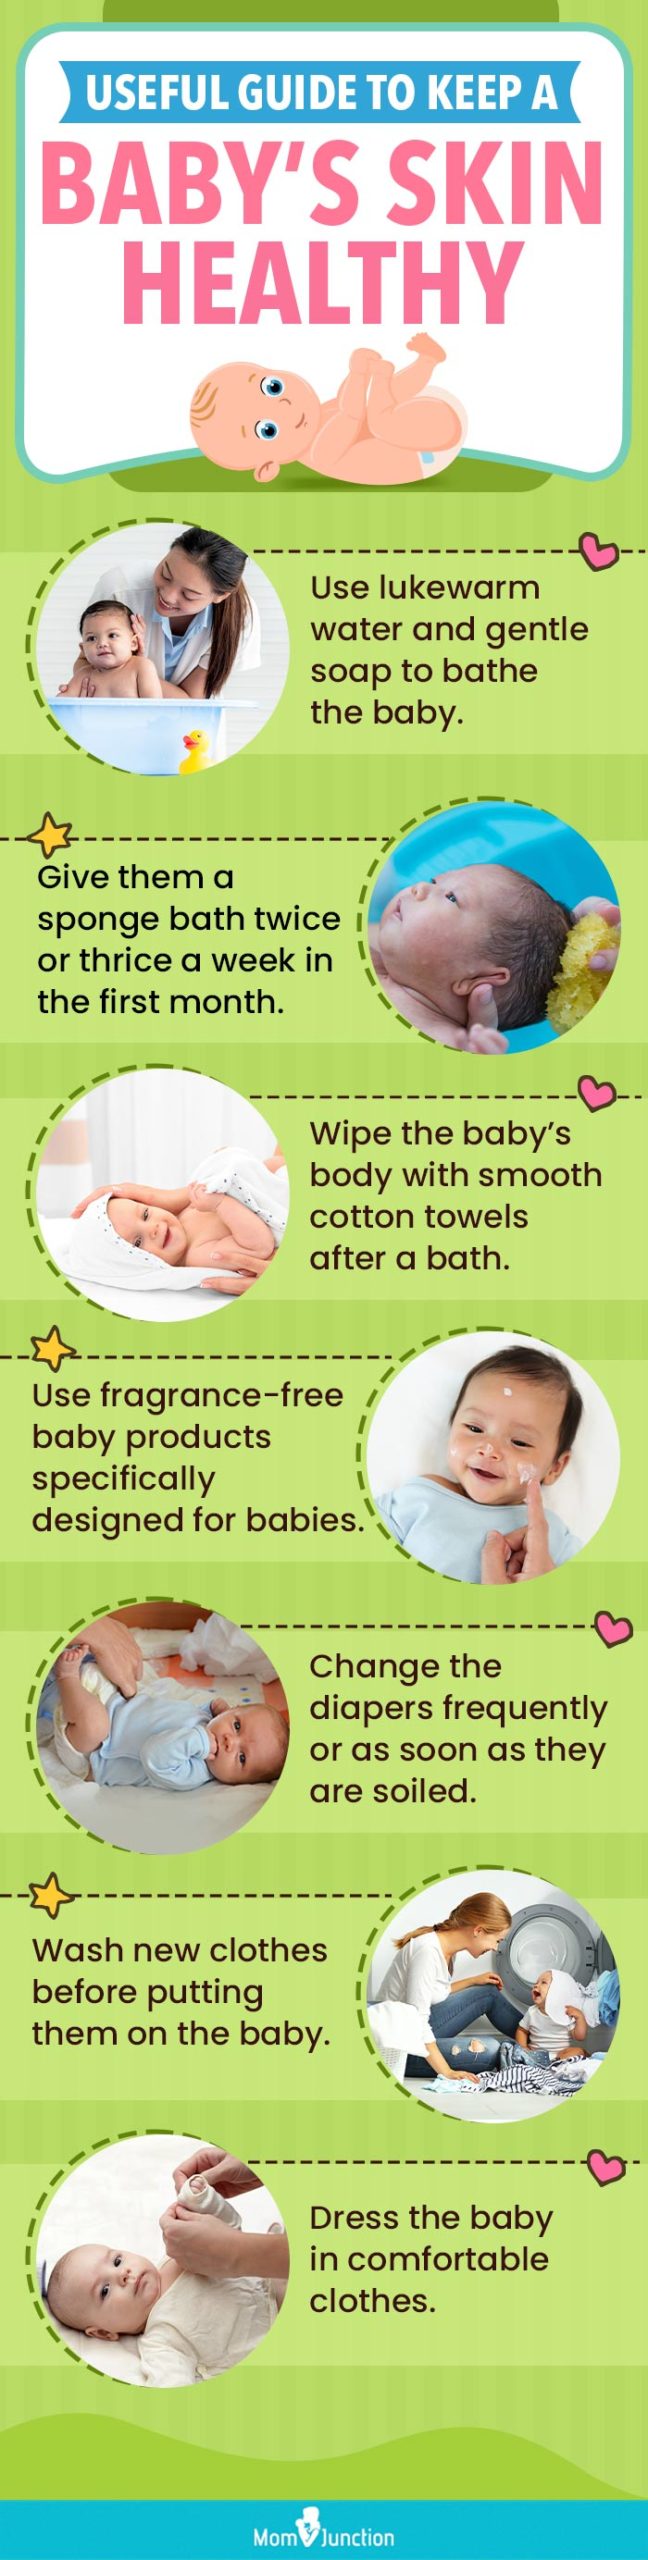 How Skin-to-Skin Care Can Benefit Your Baby